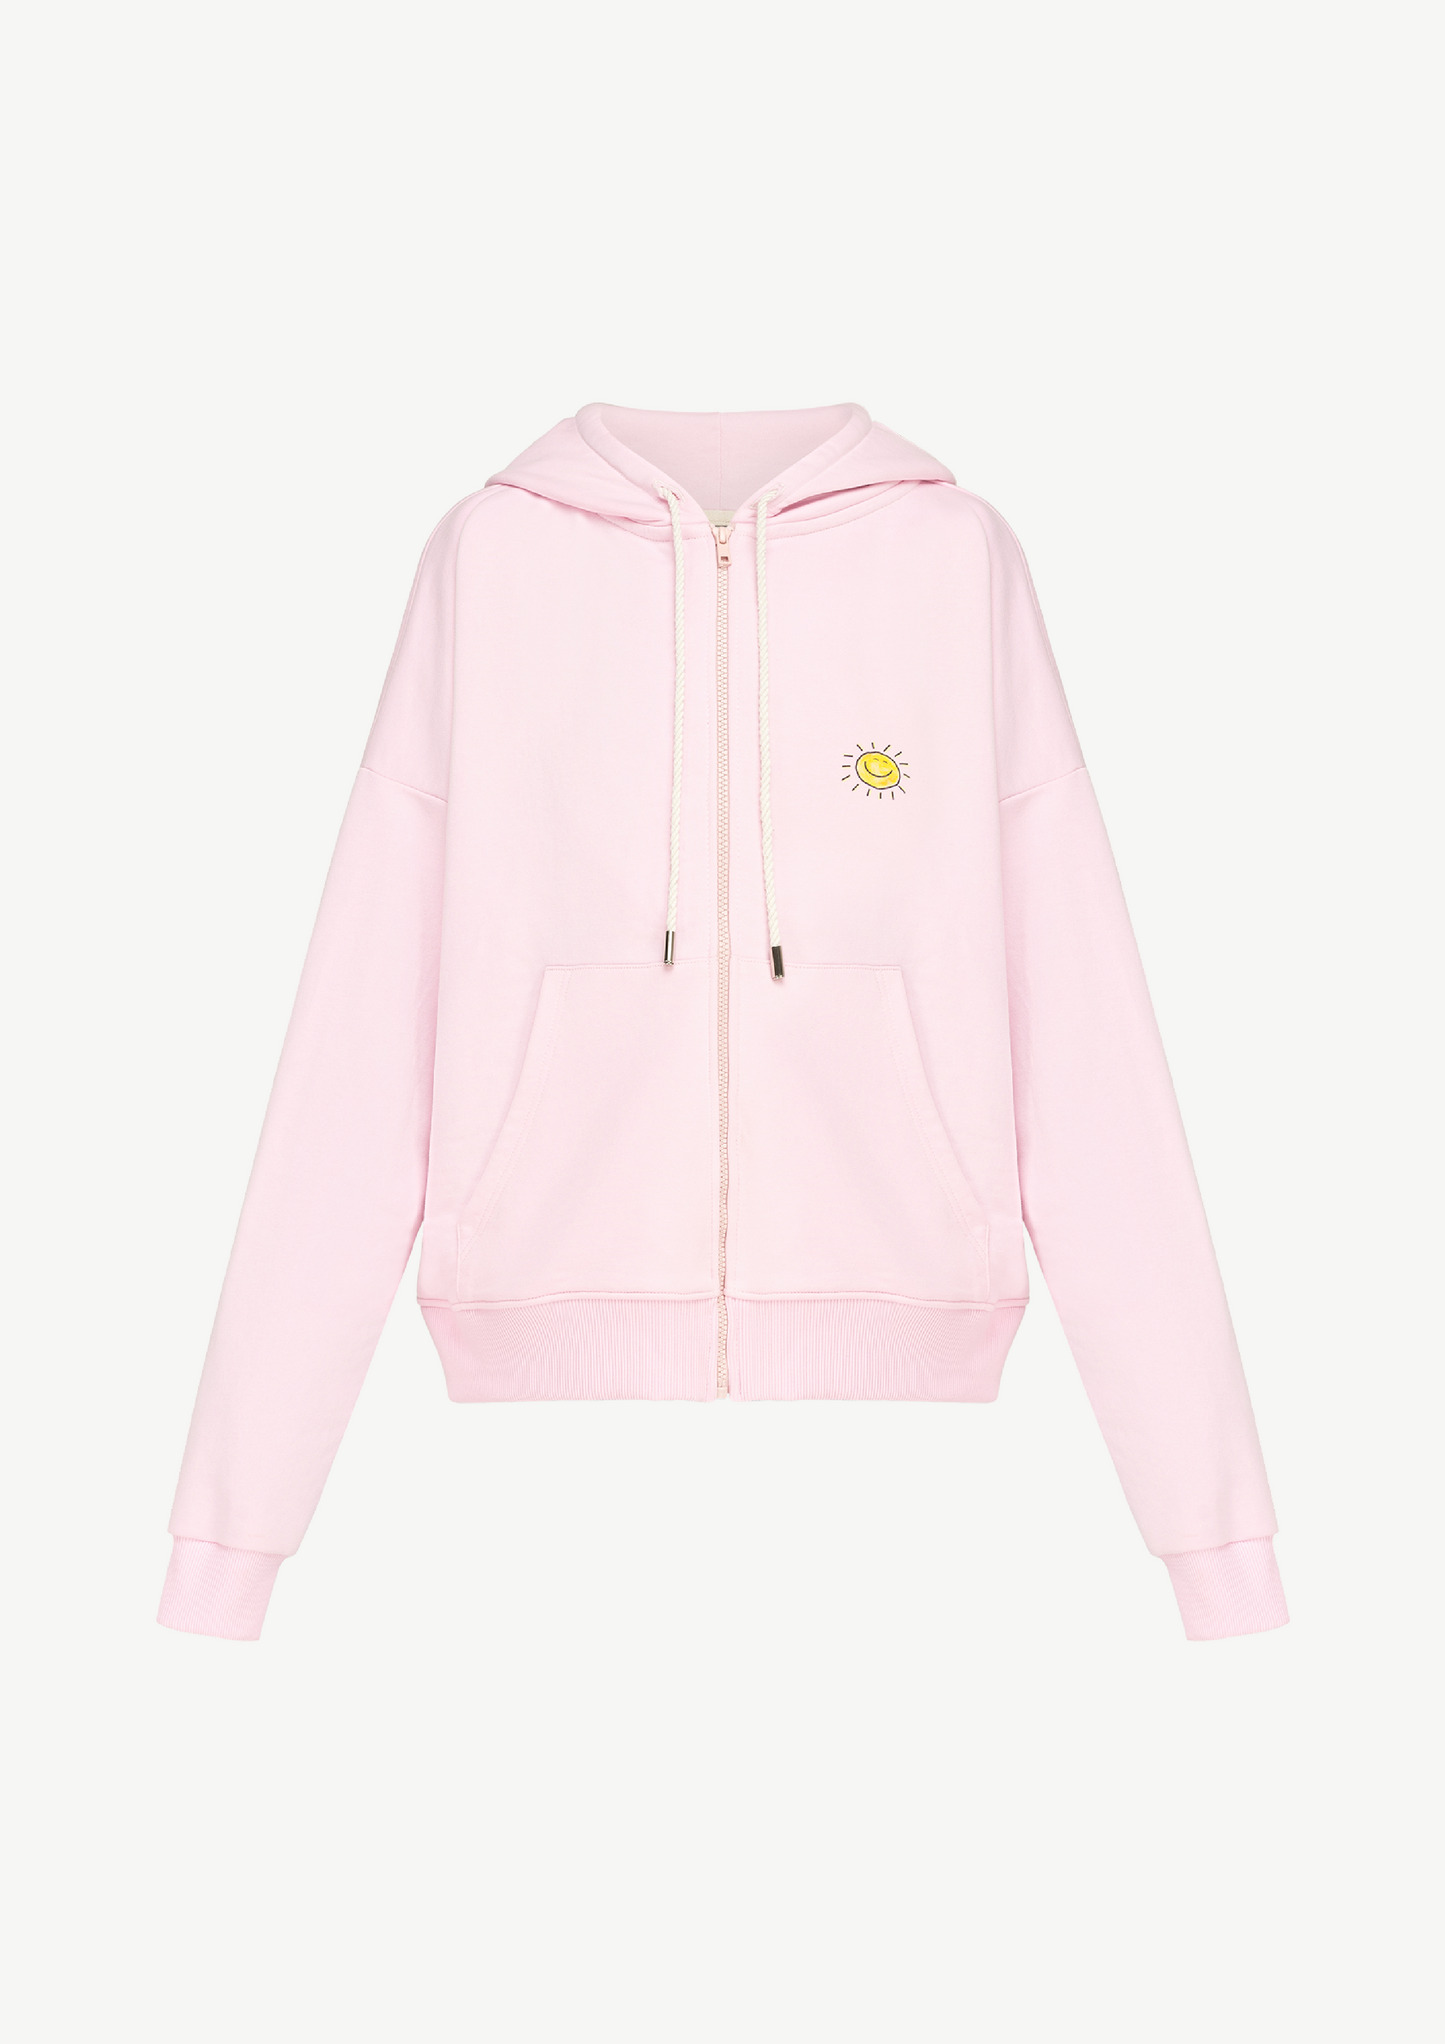 «The sun» Hoodie In Pink